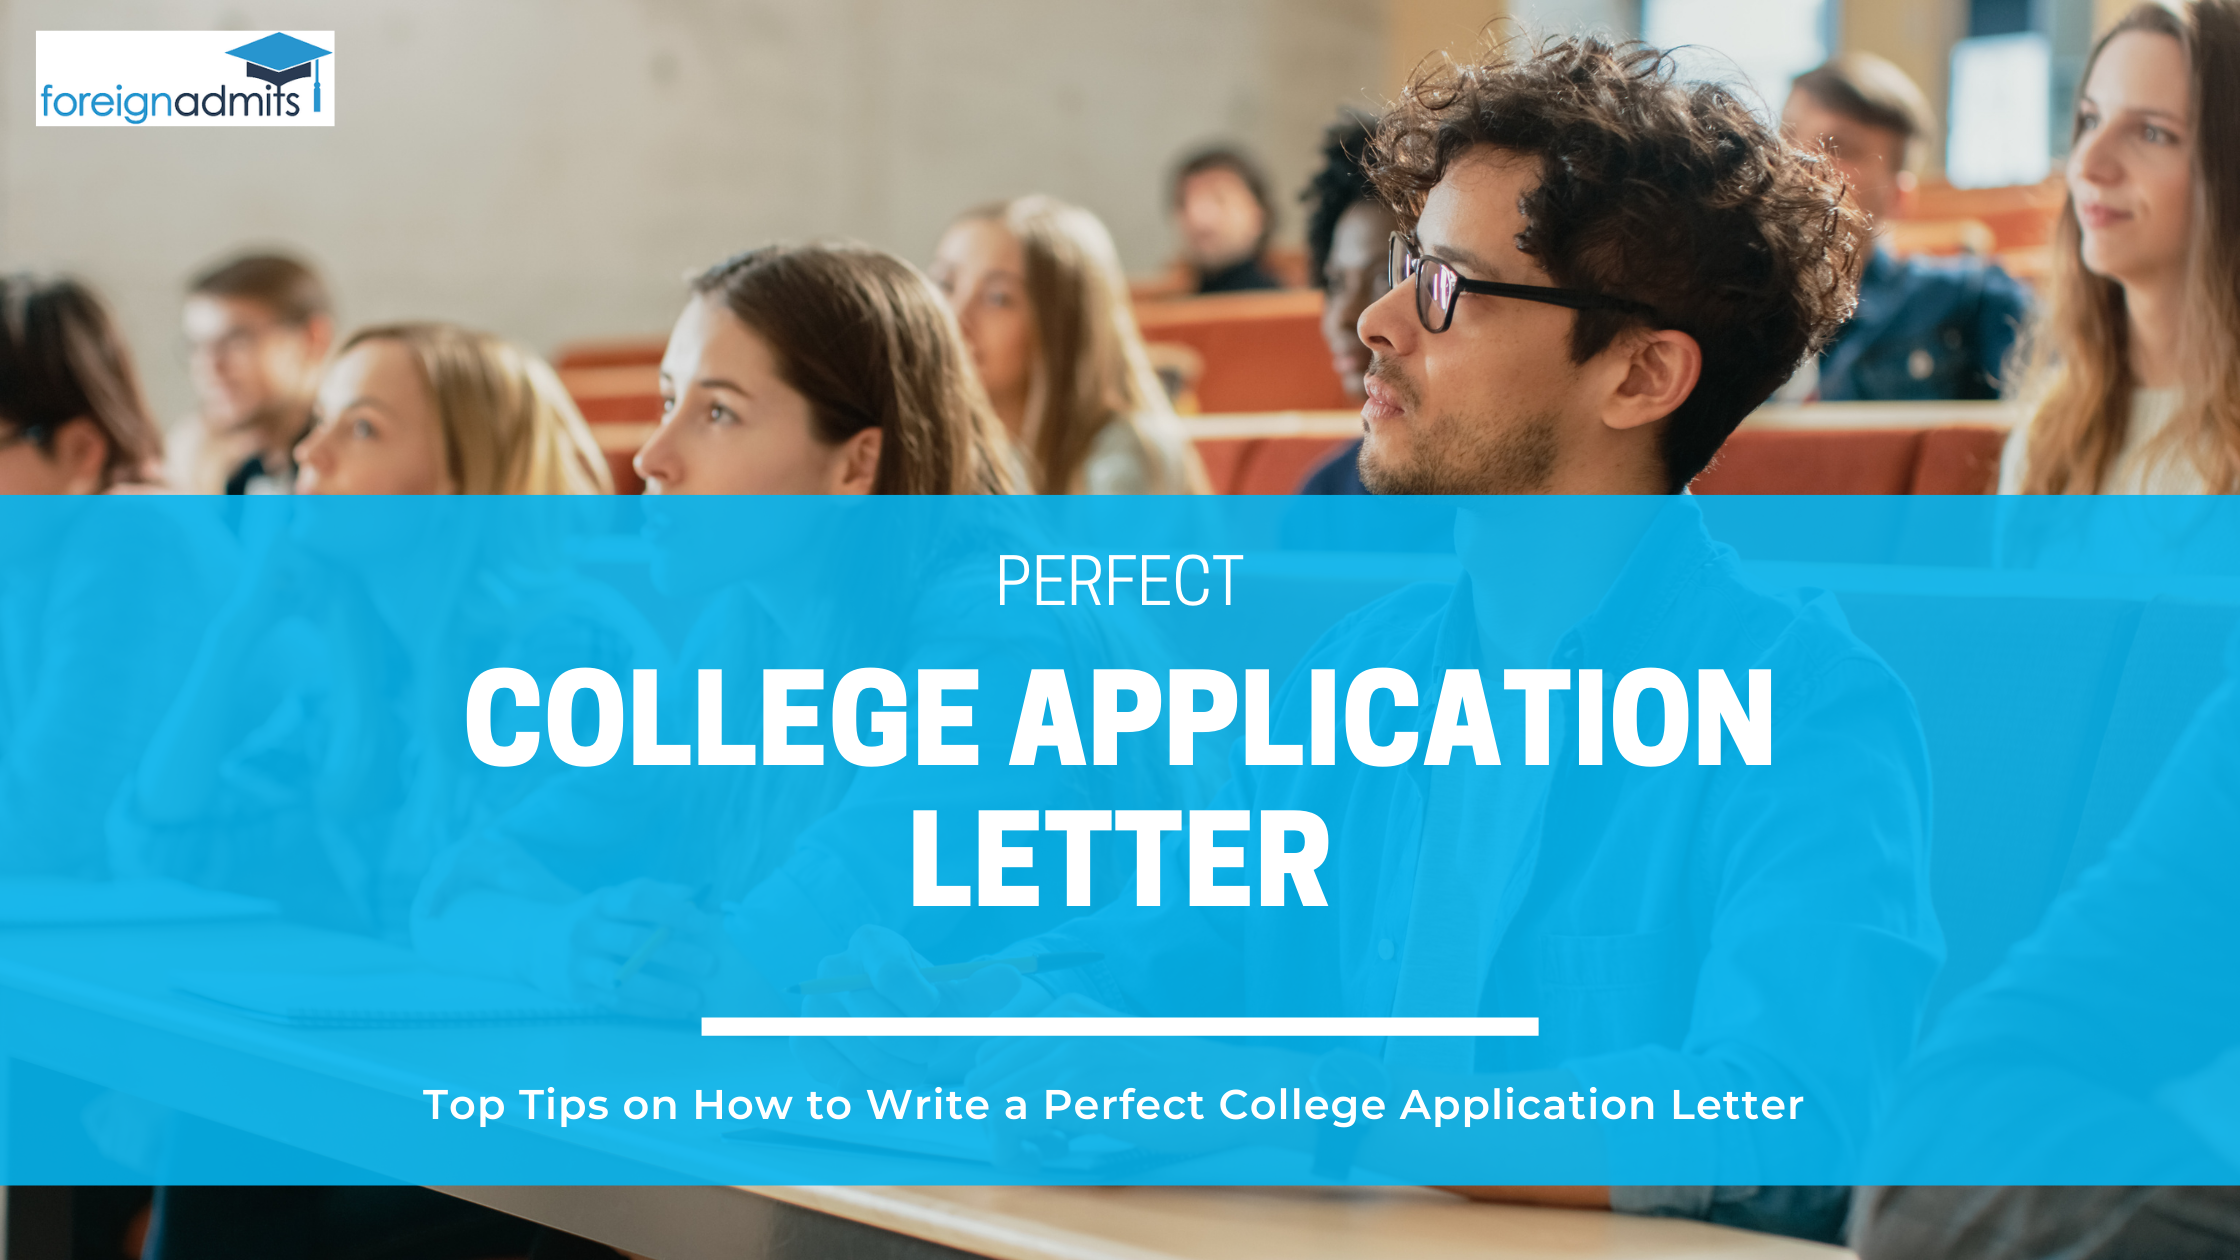 Top Tips On Writing a Perfect College Application Letter